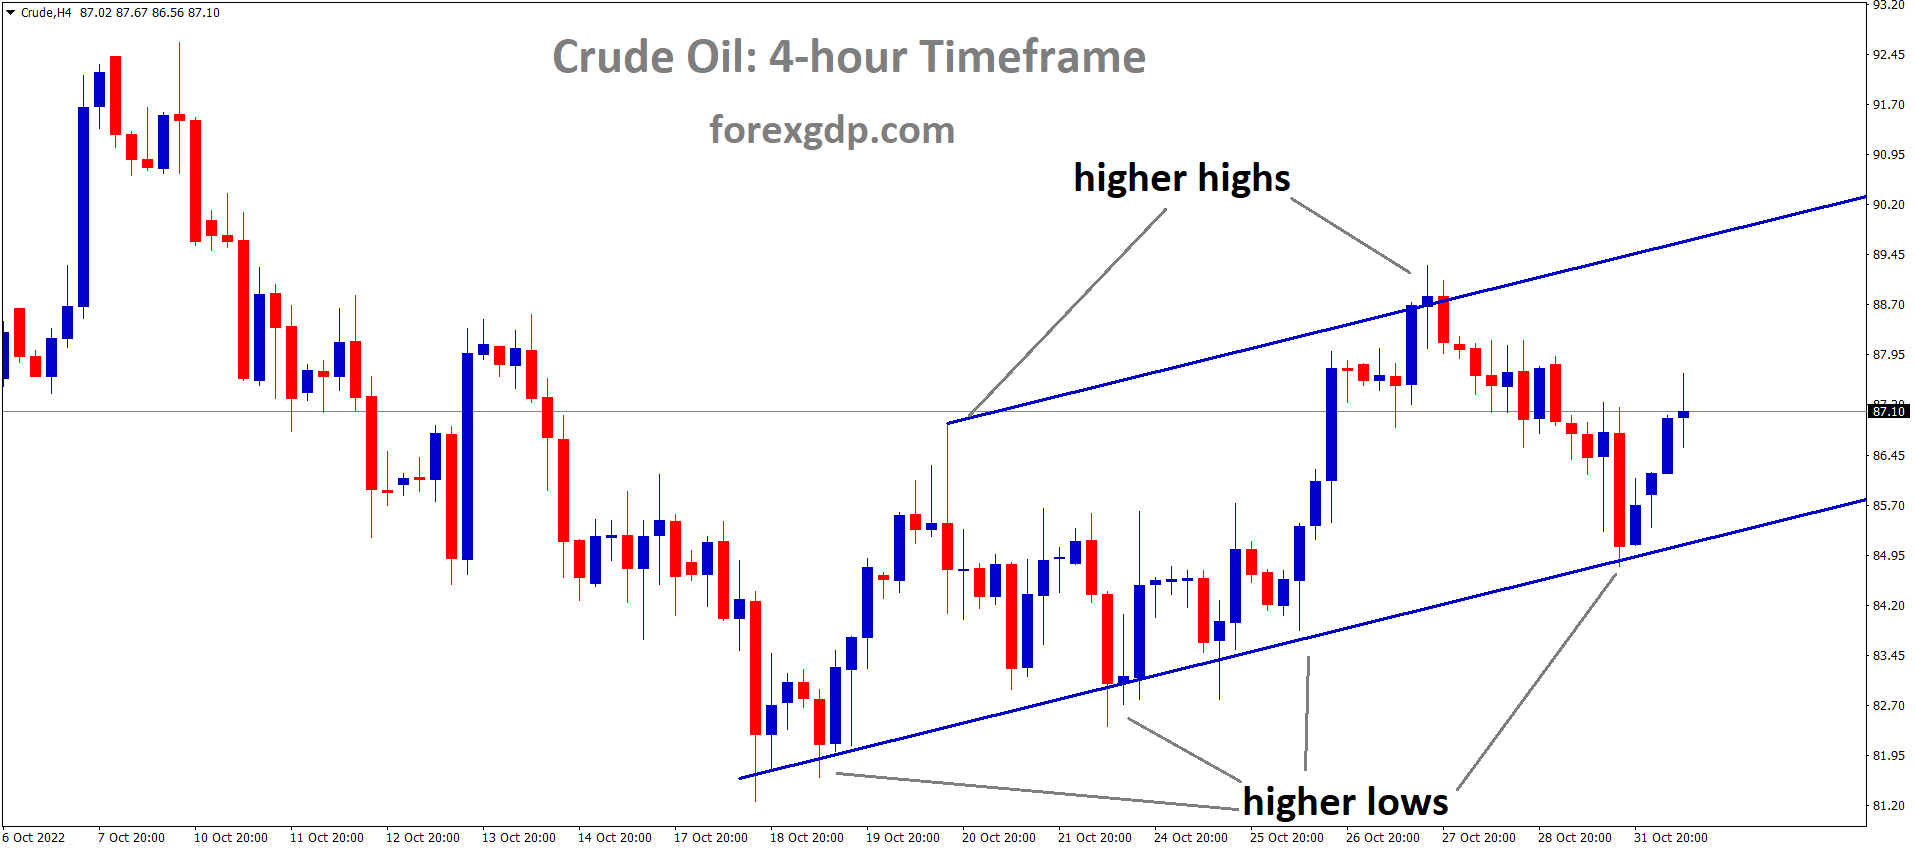 Crude Oil is moving in an Ascending channel and the market has rebounded from the higher low area of the channel